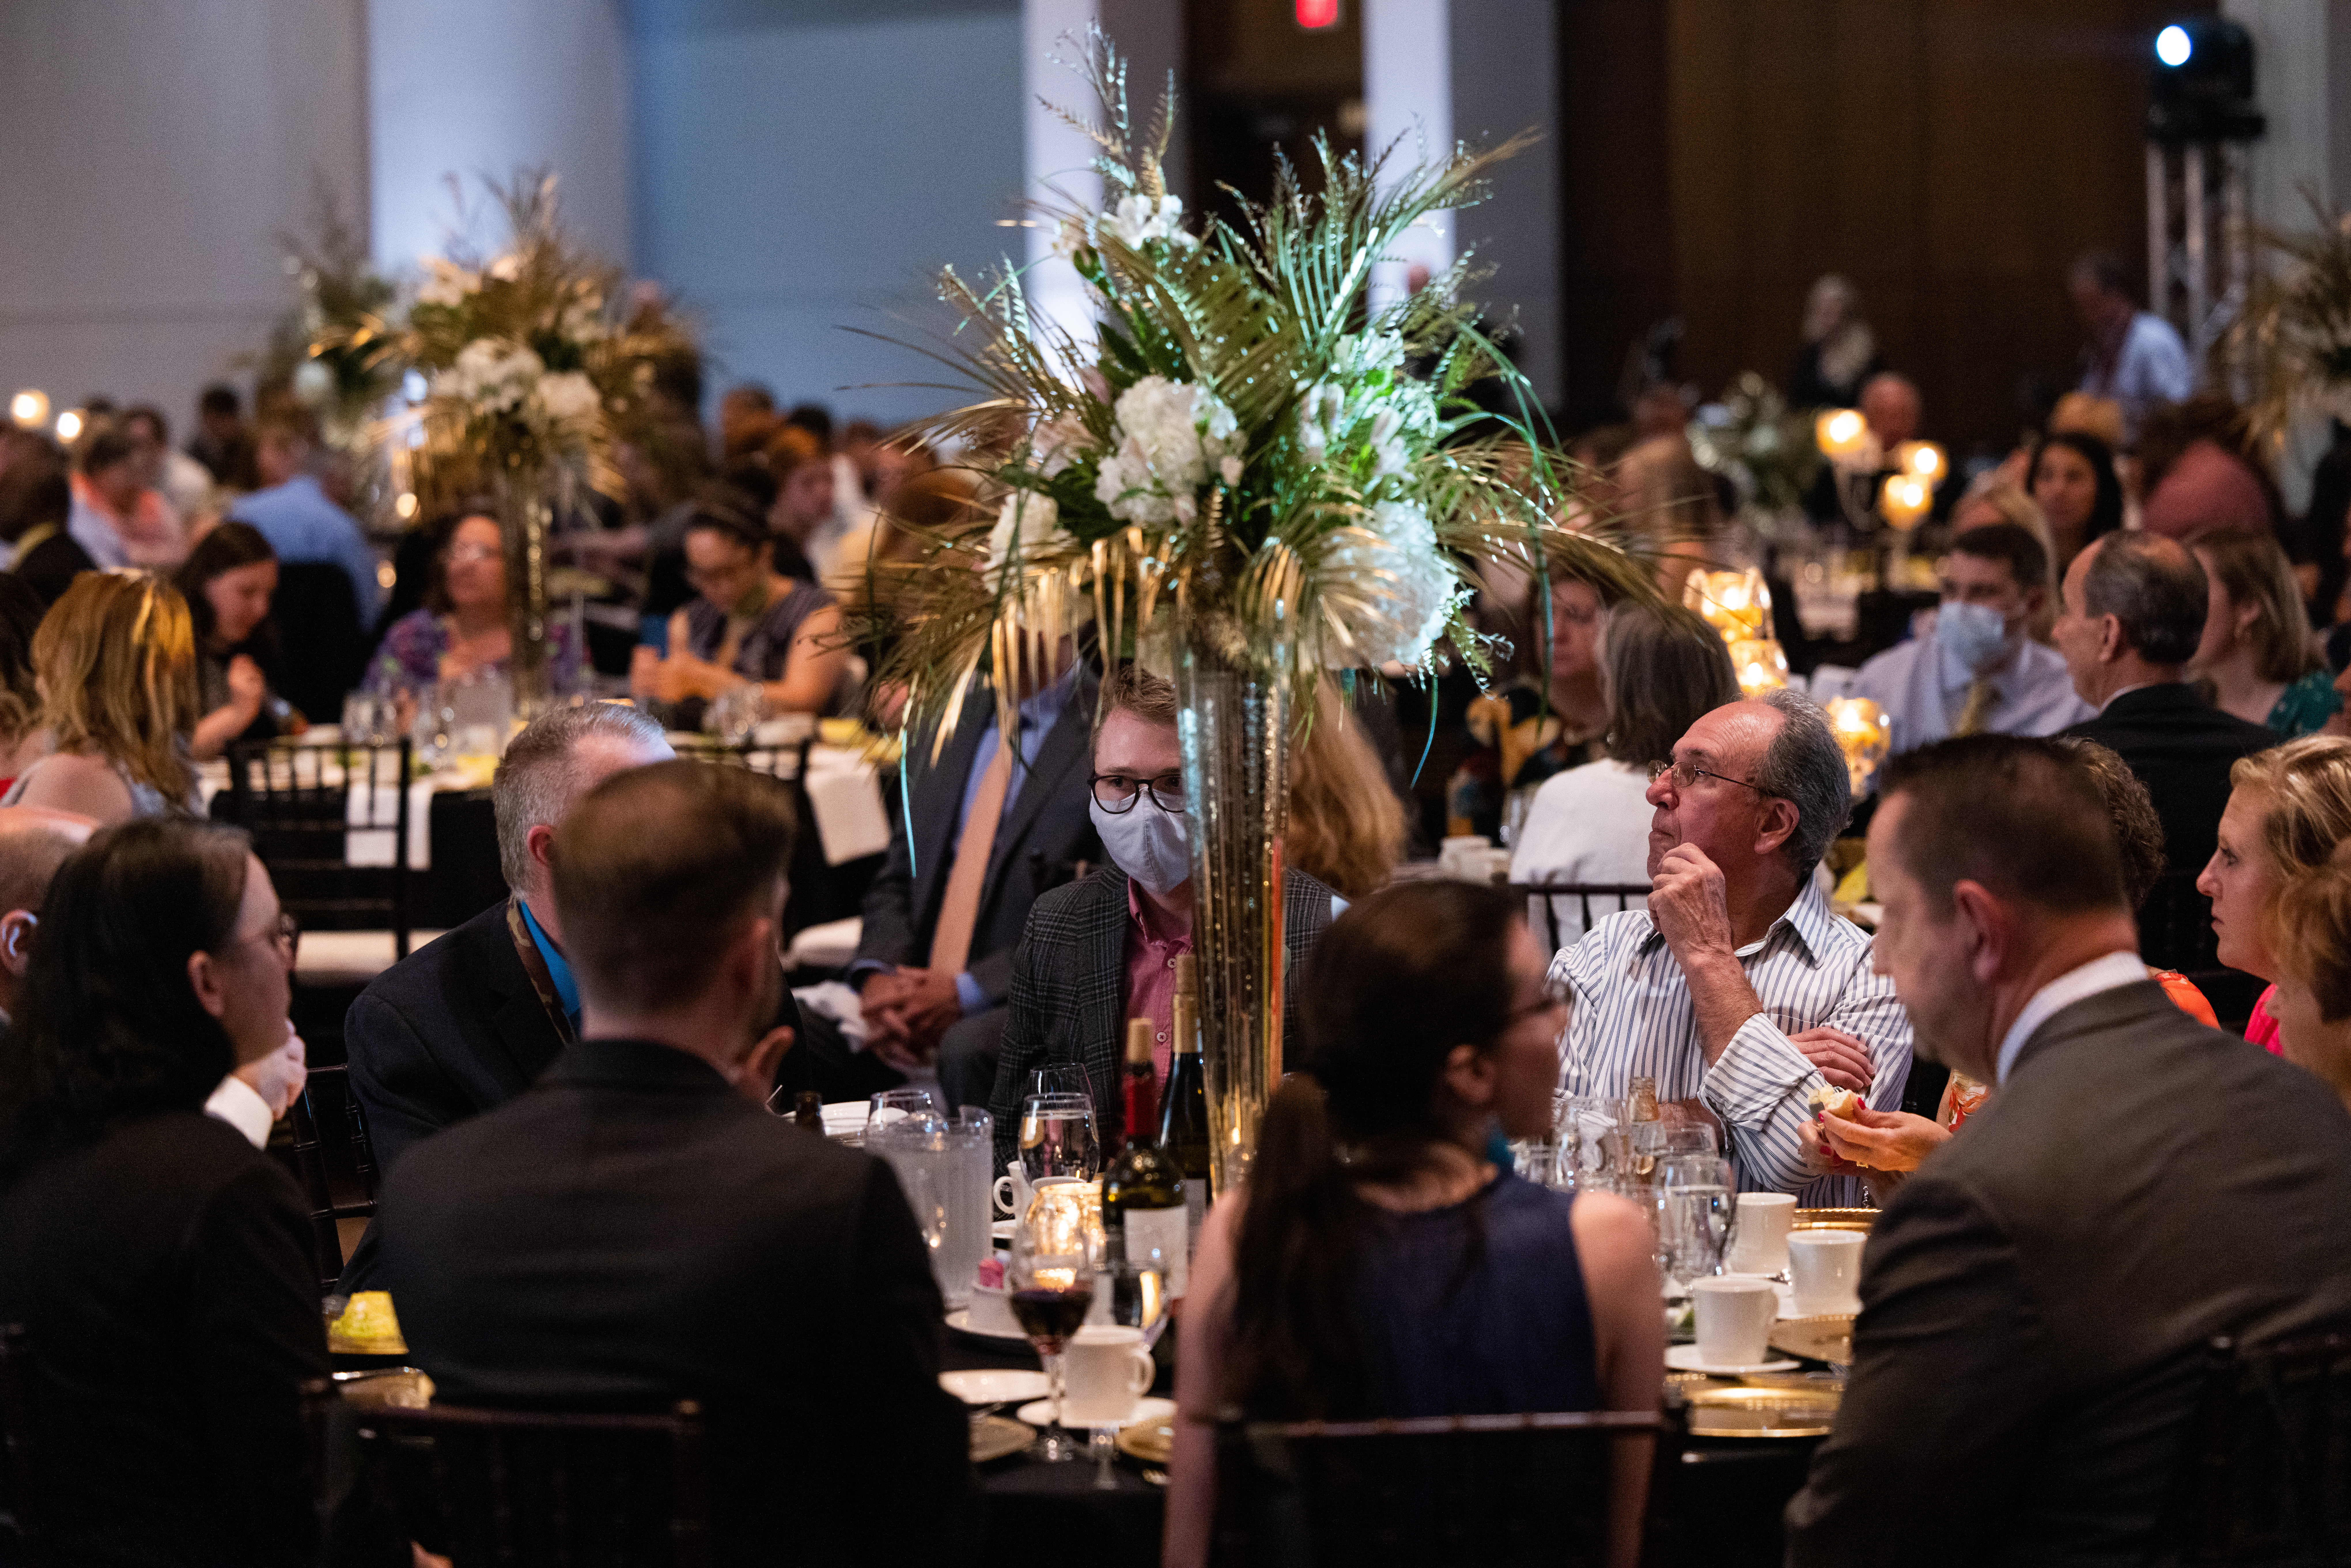 The Greater Springfield Convention and Visitors Bureau holds its 25th annual Howdy Awards for Hospitality Excellence at the MassMutual Center Monday evening, May 16, 2022. (Hoang ‘Leon’ Nguyen / The Republican)